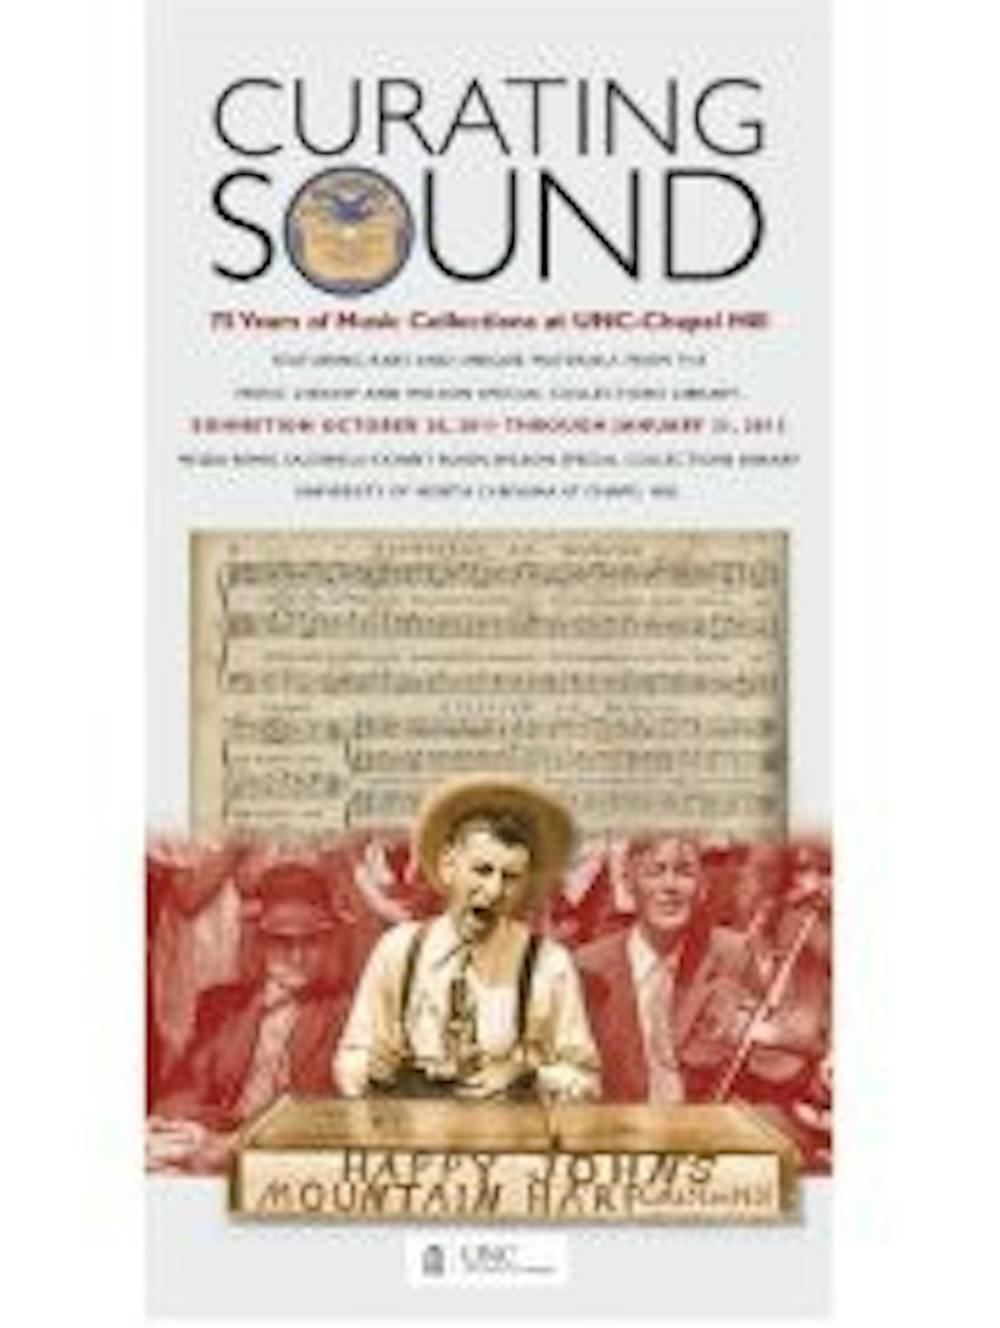 	Promotion poster for Curating Sound: 75 Years of Music Collections at UNC Chapel Hill